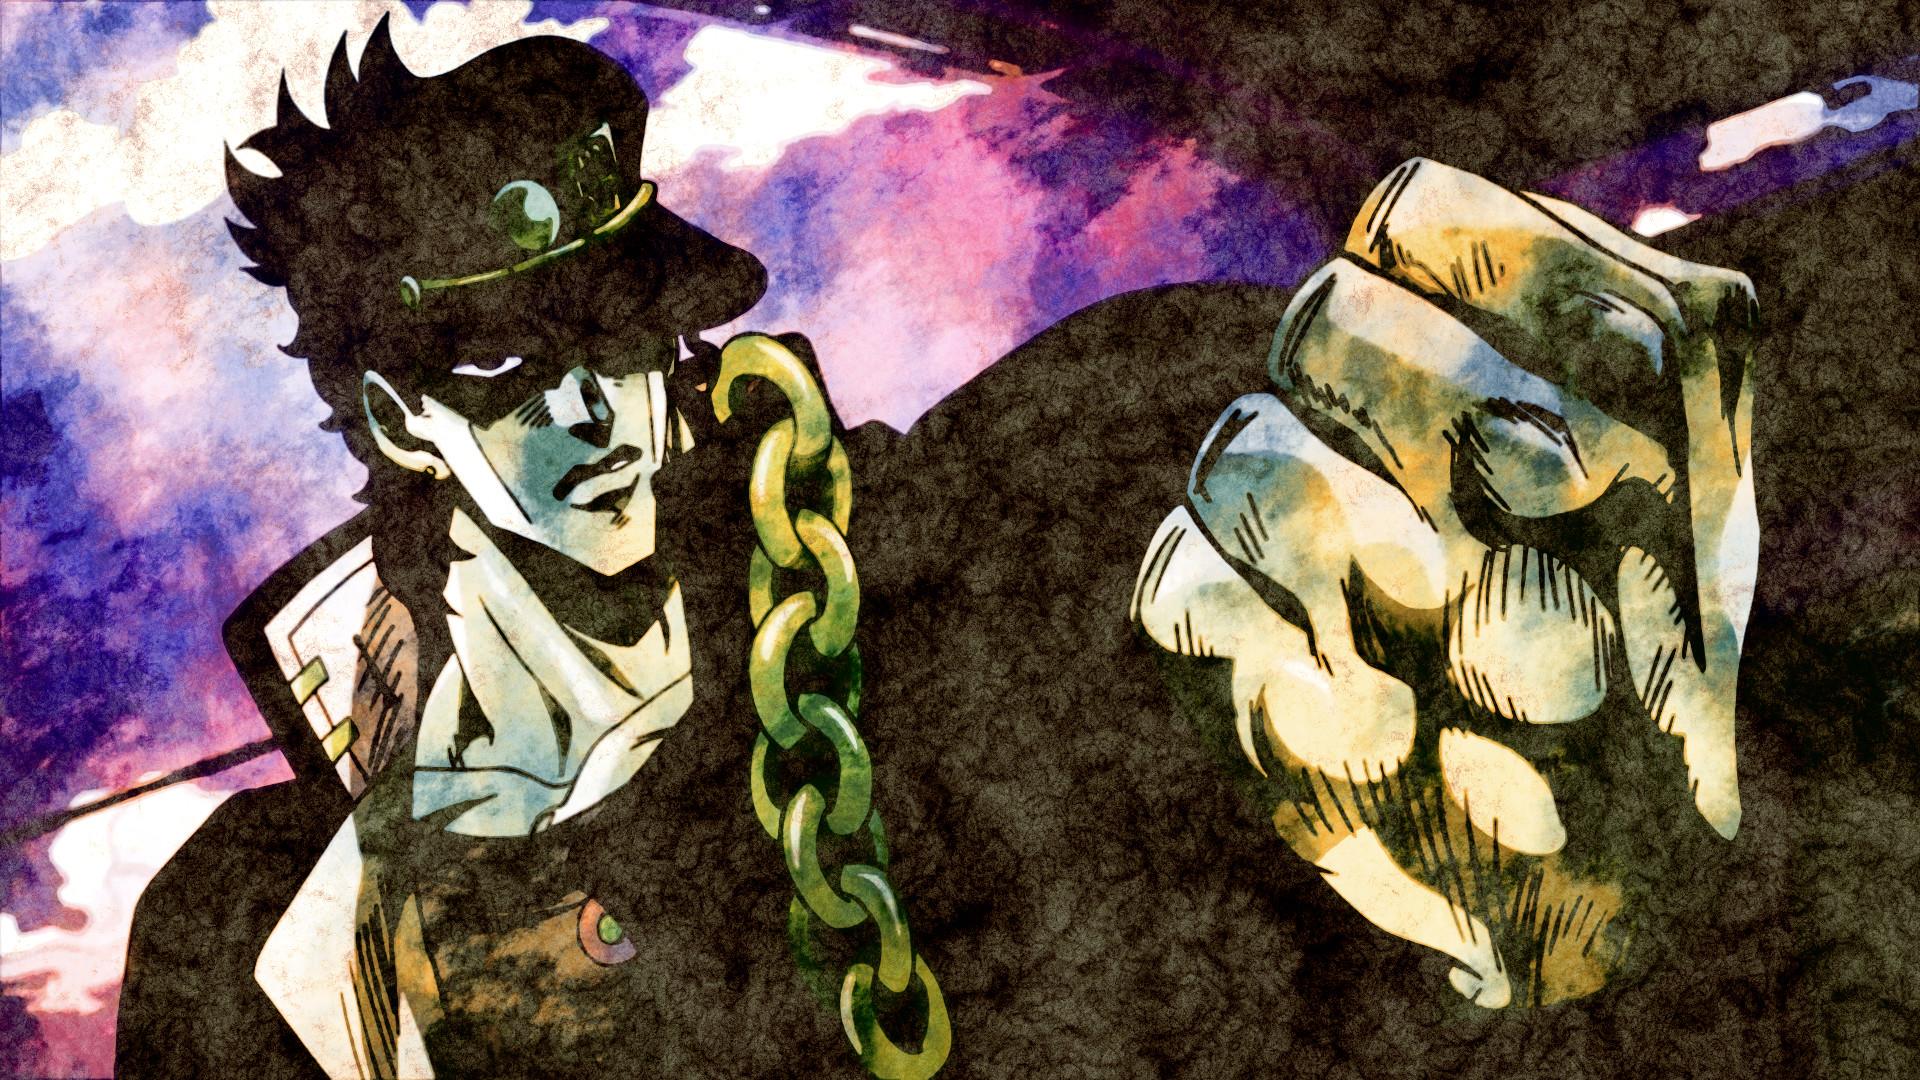 DIO and Jotaro wallpaper by me  rStardustCrusaders